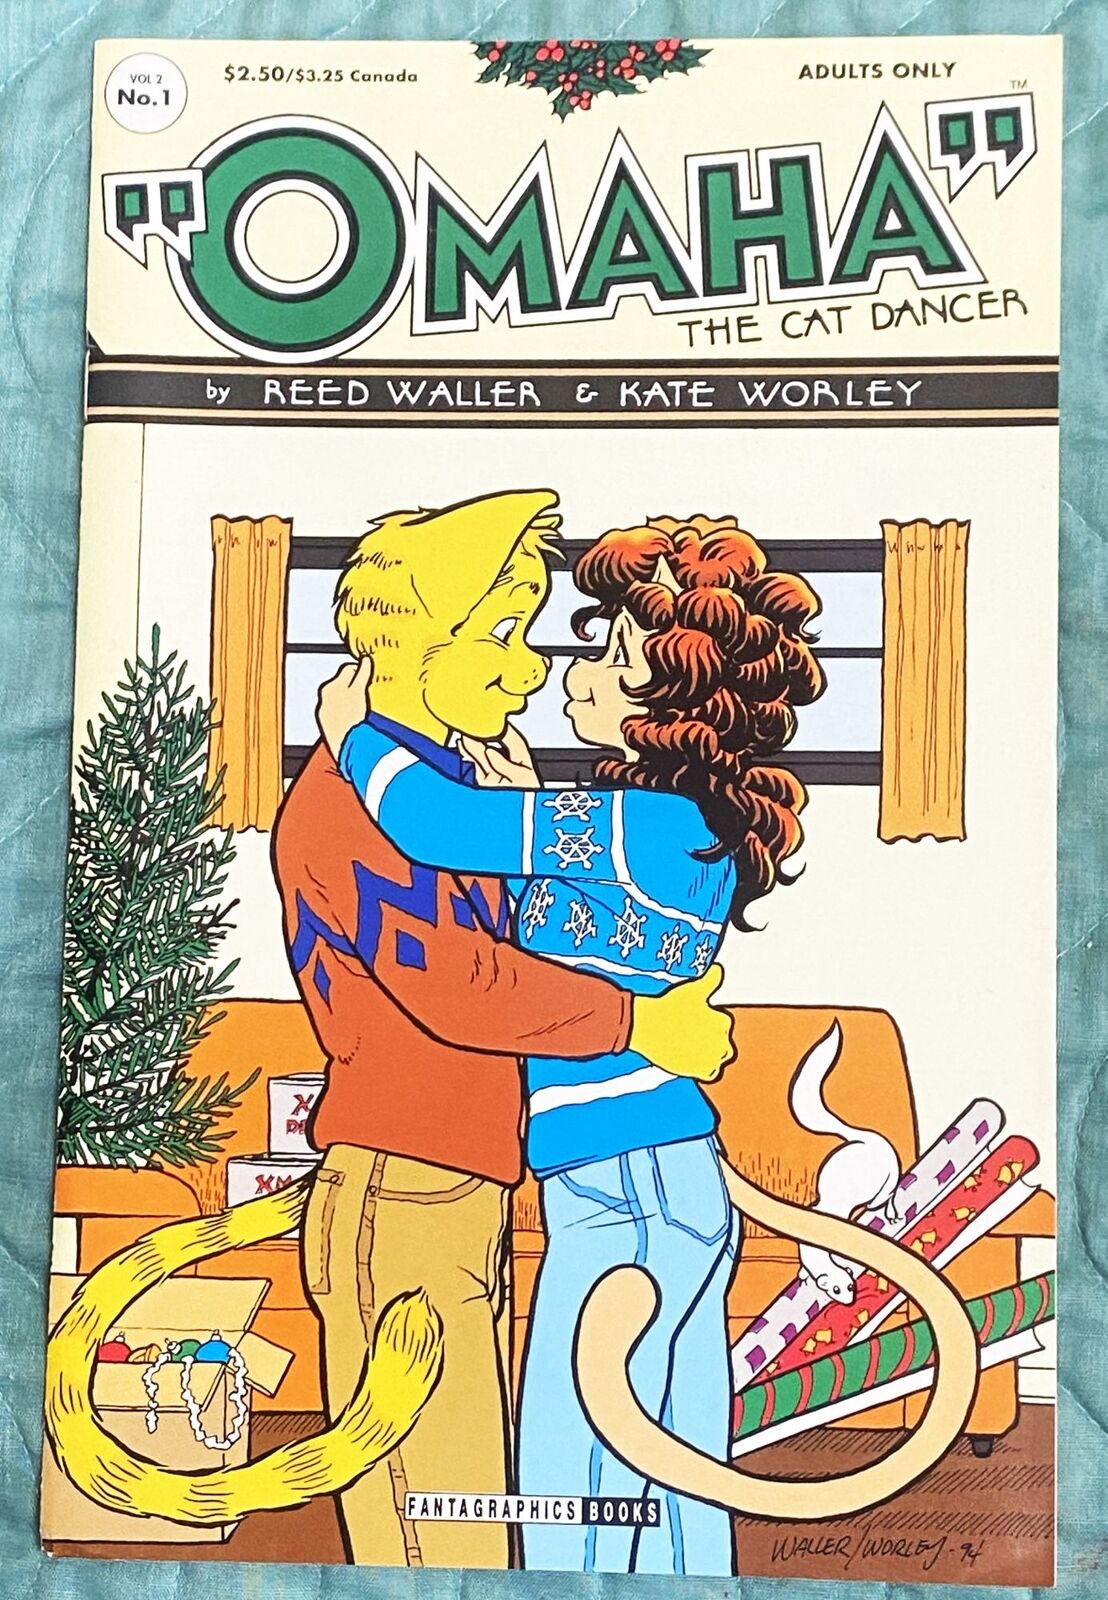 Reed Waller, Kate Worley / OMAHA THE CAT DANCER VOL 2 NO 1 1994